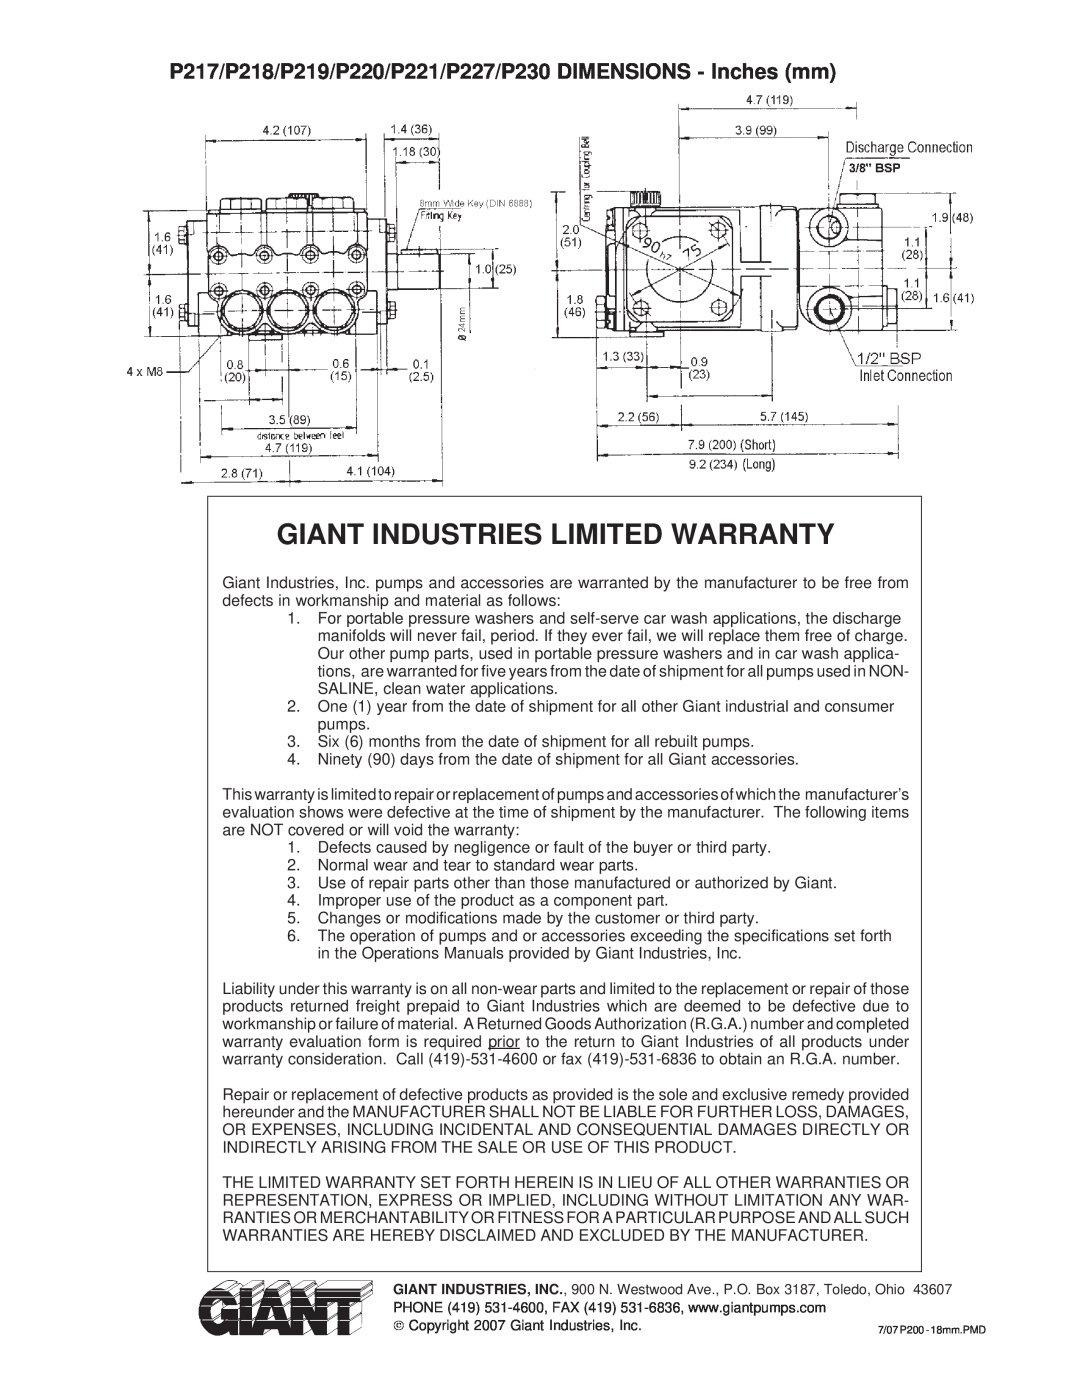 Giant service manual P217/P218/P219/P220/P221/P227/P230 DIMENSIONS - Inches mm, Giant Industries Limited Warranty 